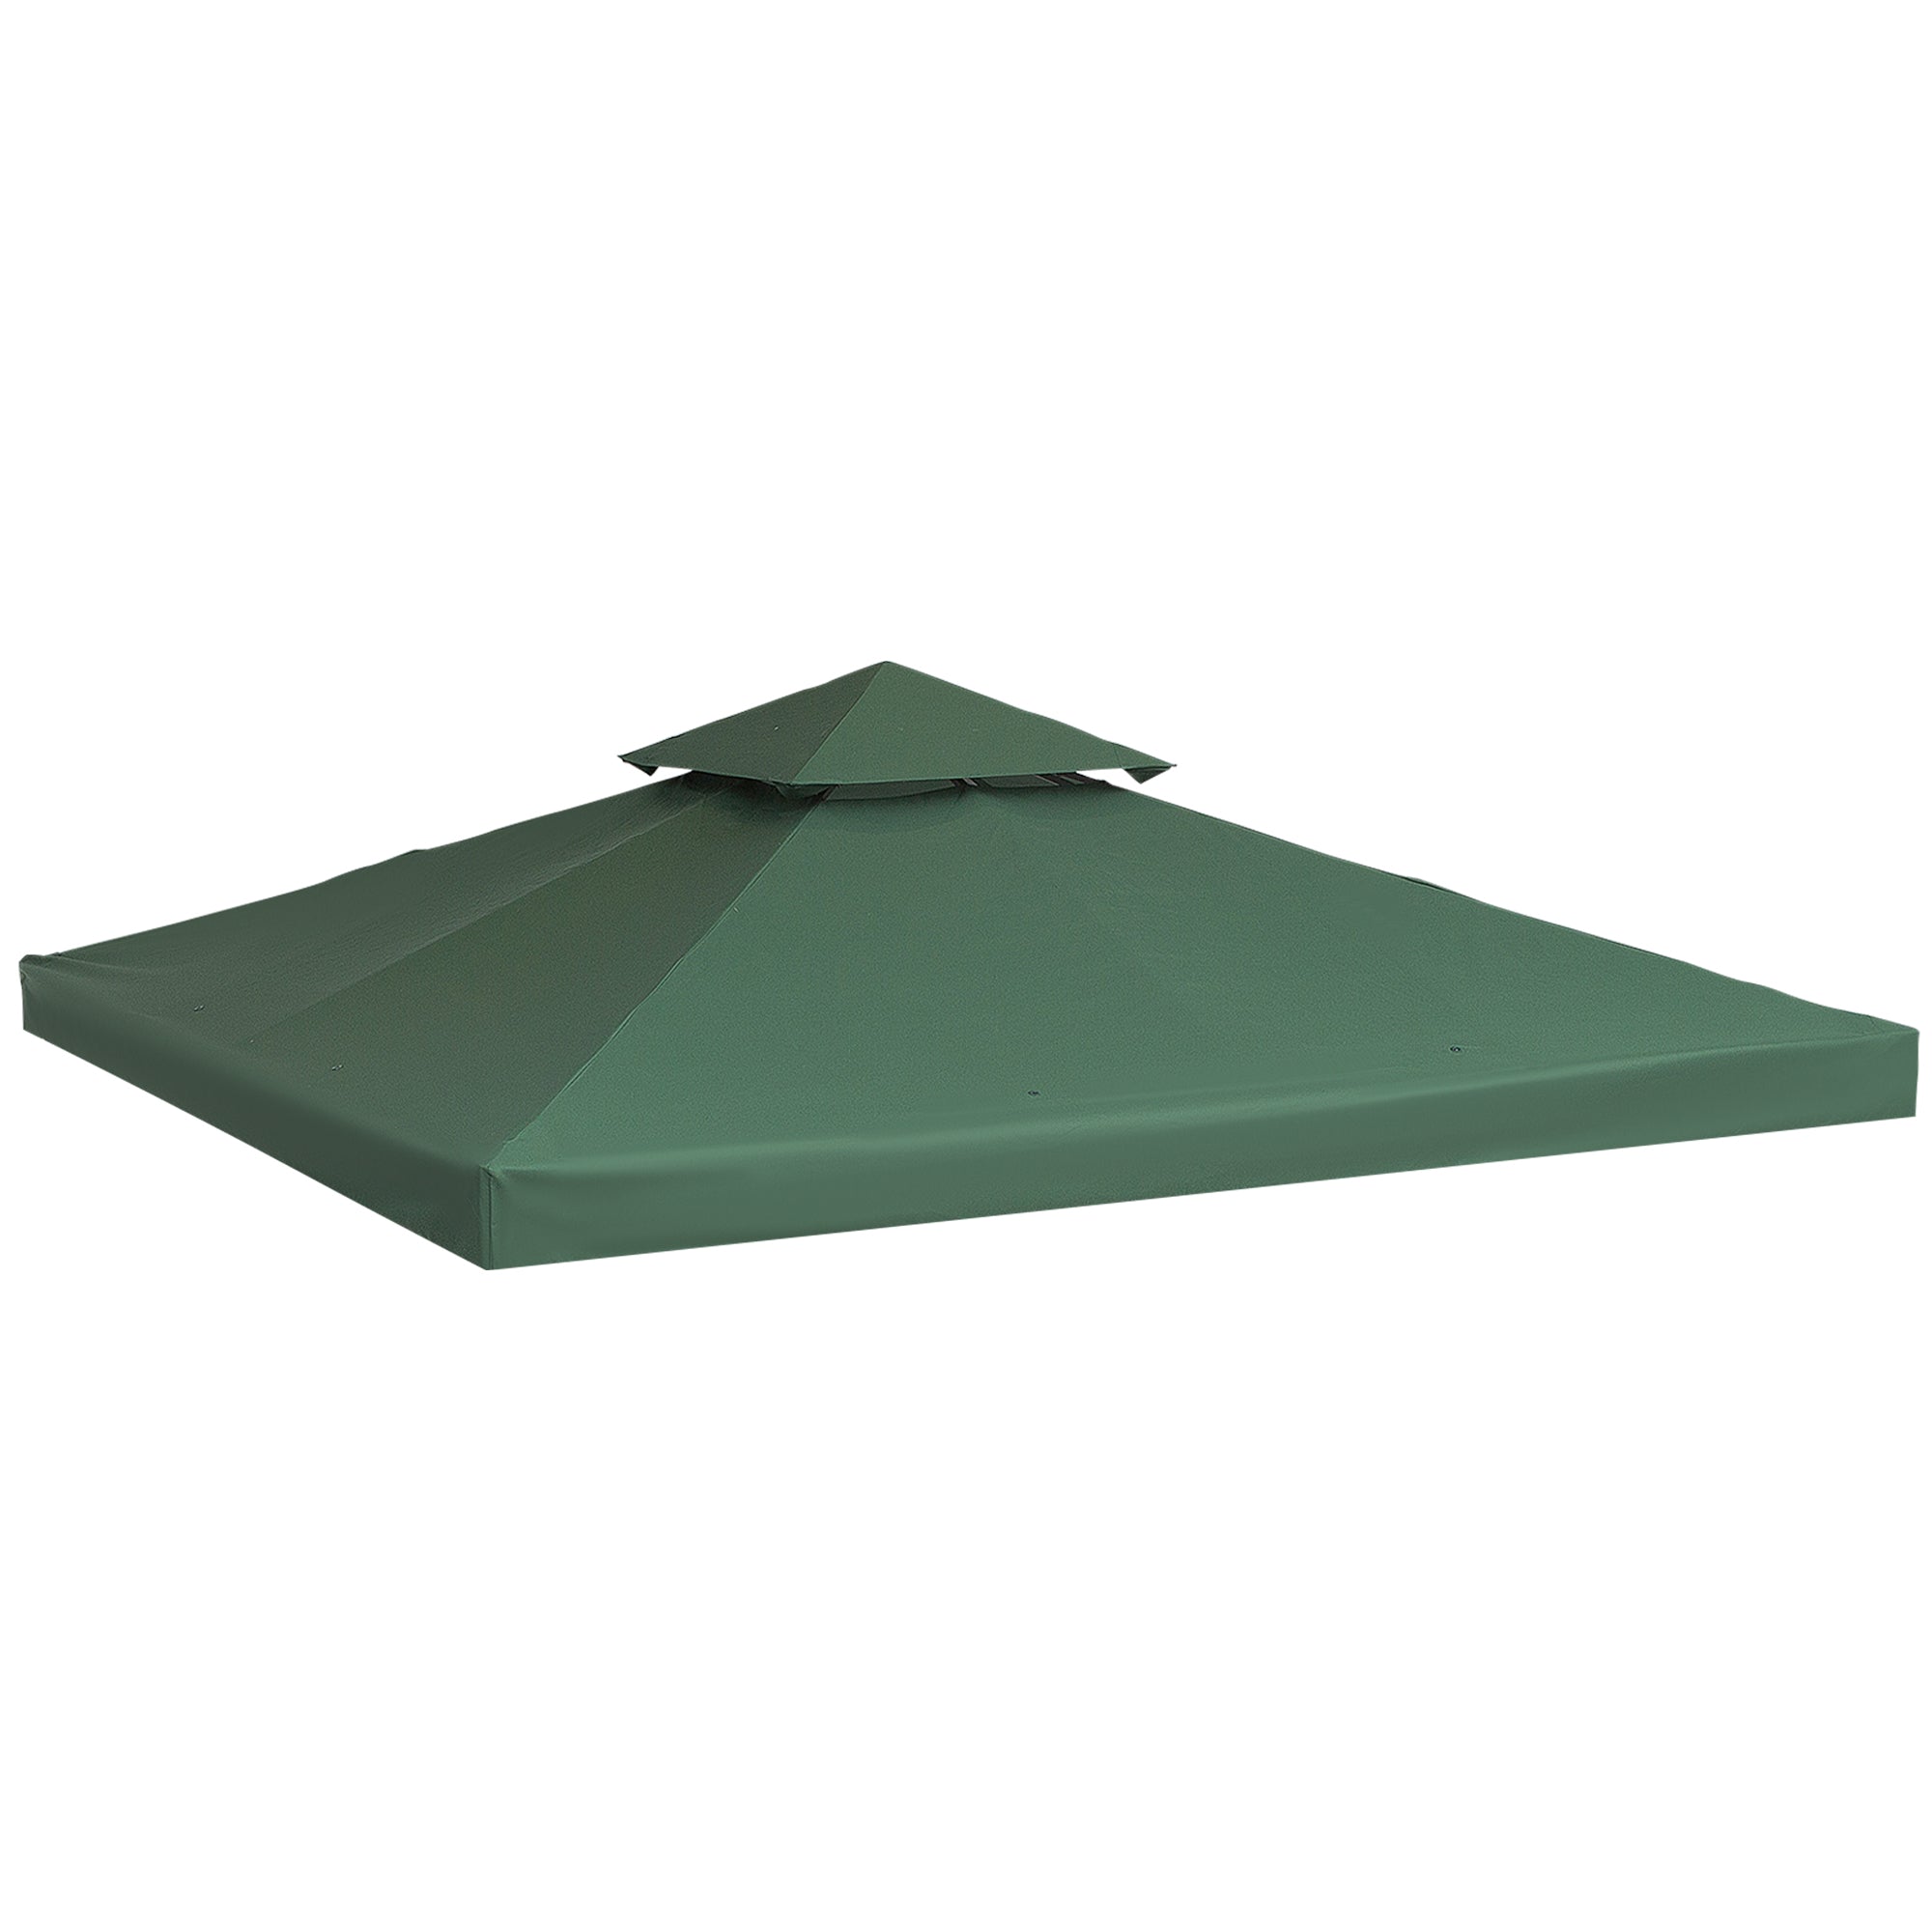 Outsunny 3(m) 2 Tier Garden Gazebo Top Cover Replacement Canopy Roof Dark Green  | TJ Hughes